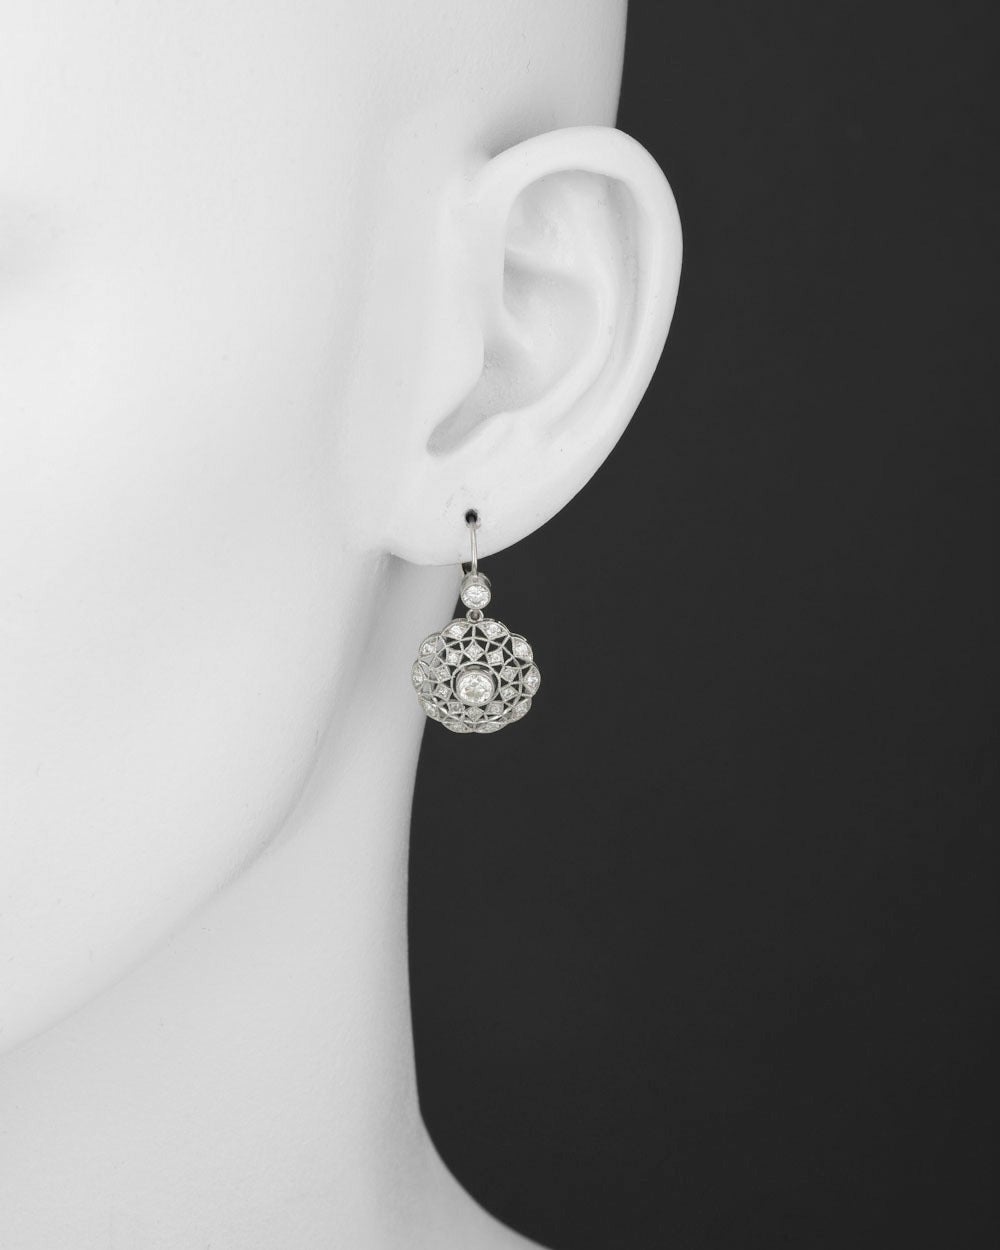 Diamond filigree drop earrings, with round diamonds weighing approximately 1.60 total carats, mounted in platinum, on a French wire with hinged enclosure. 1.10